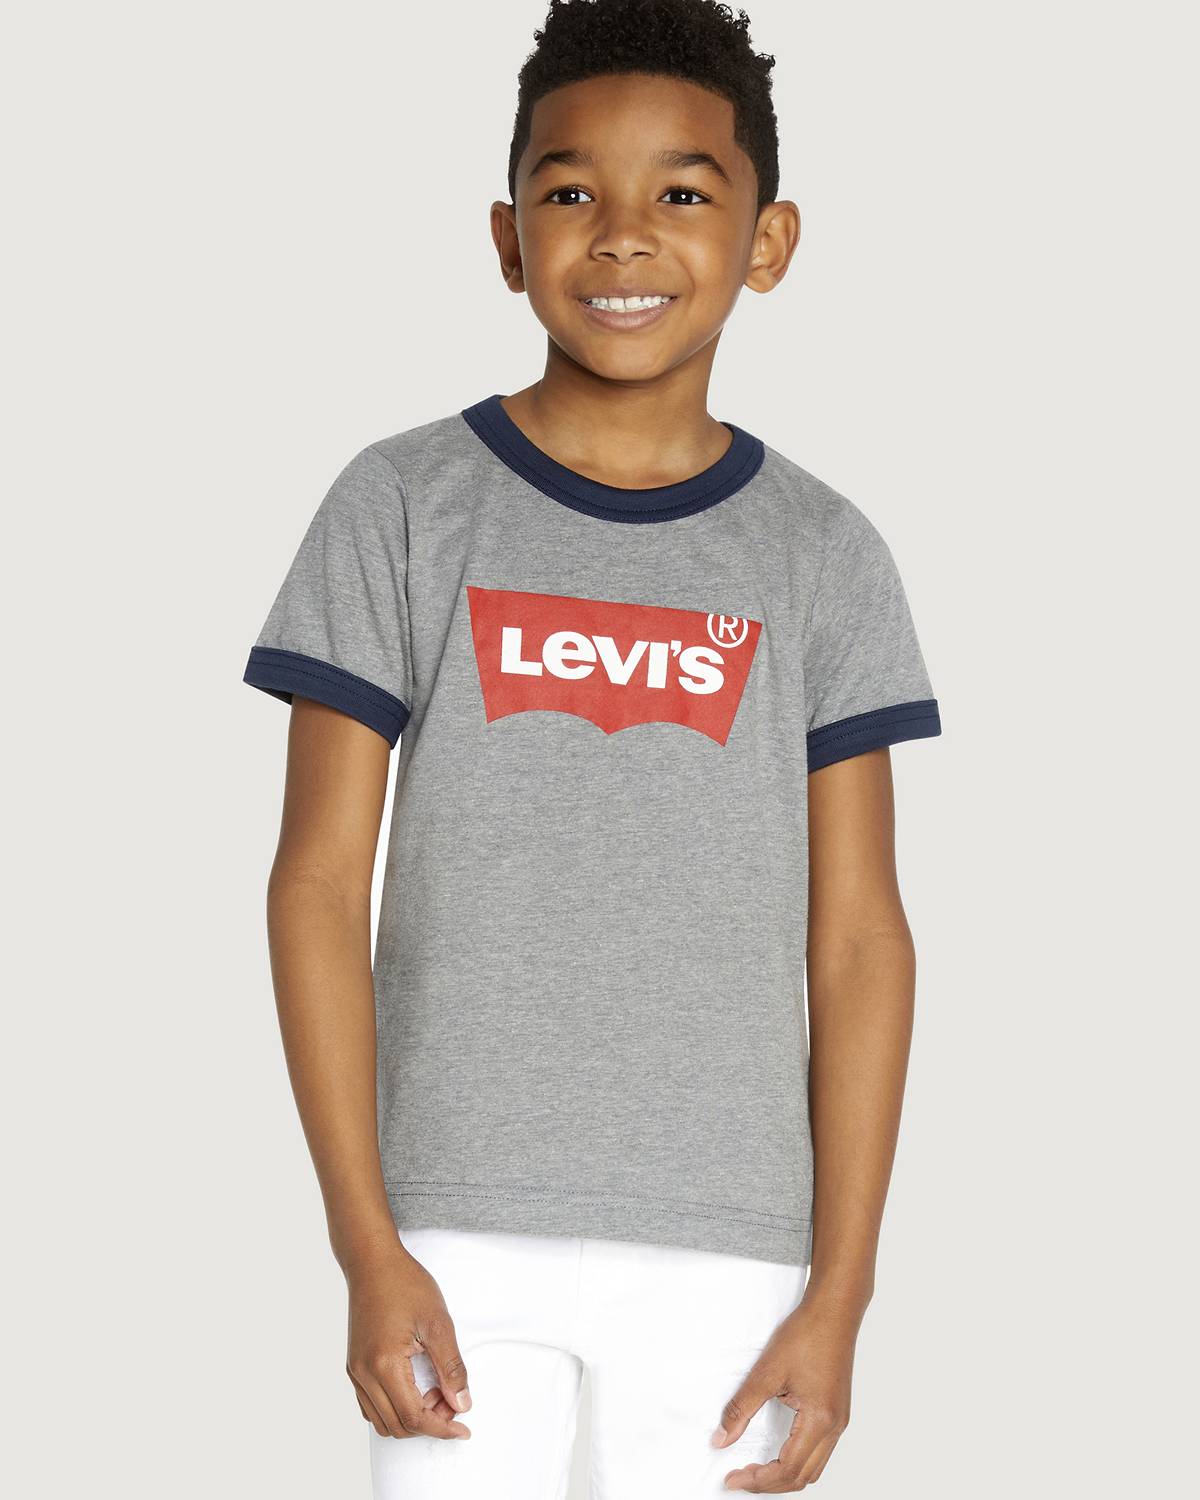 Little boy model wearing shorts and a tee.